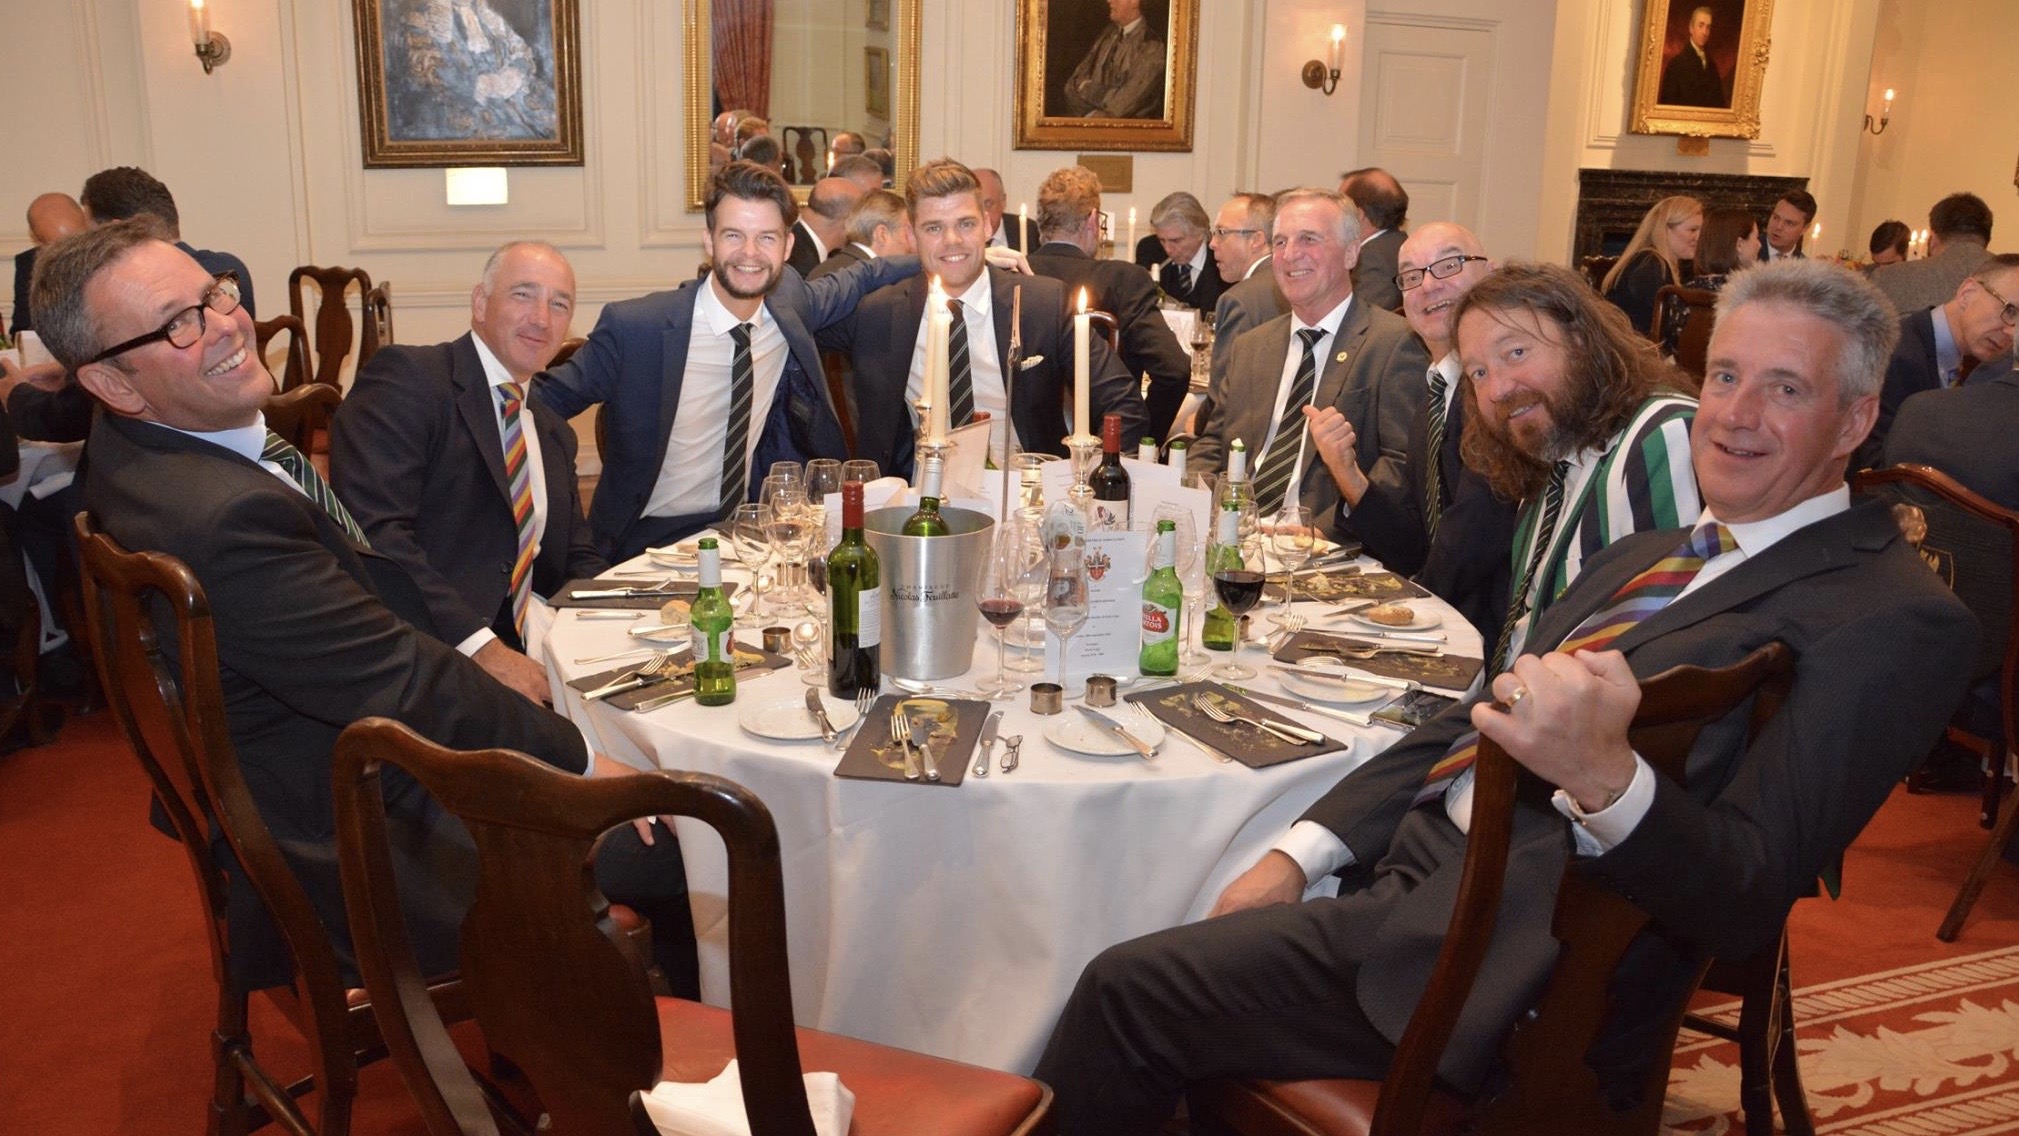 Attendees at a London Dinner event